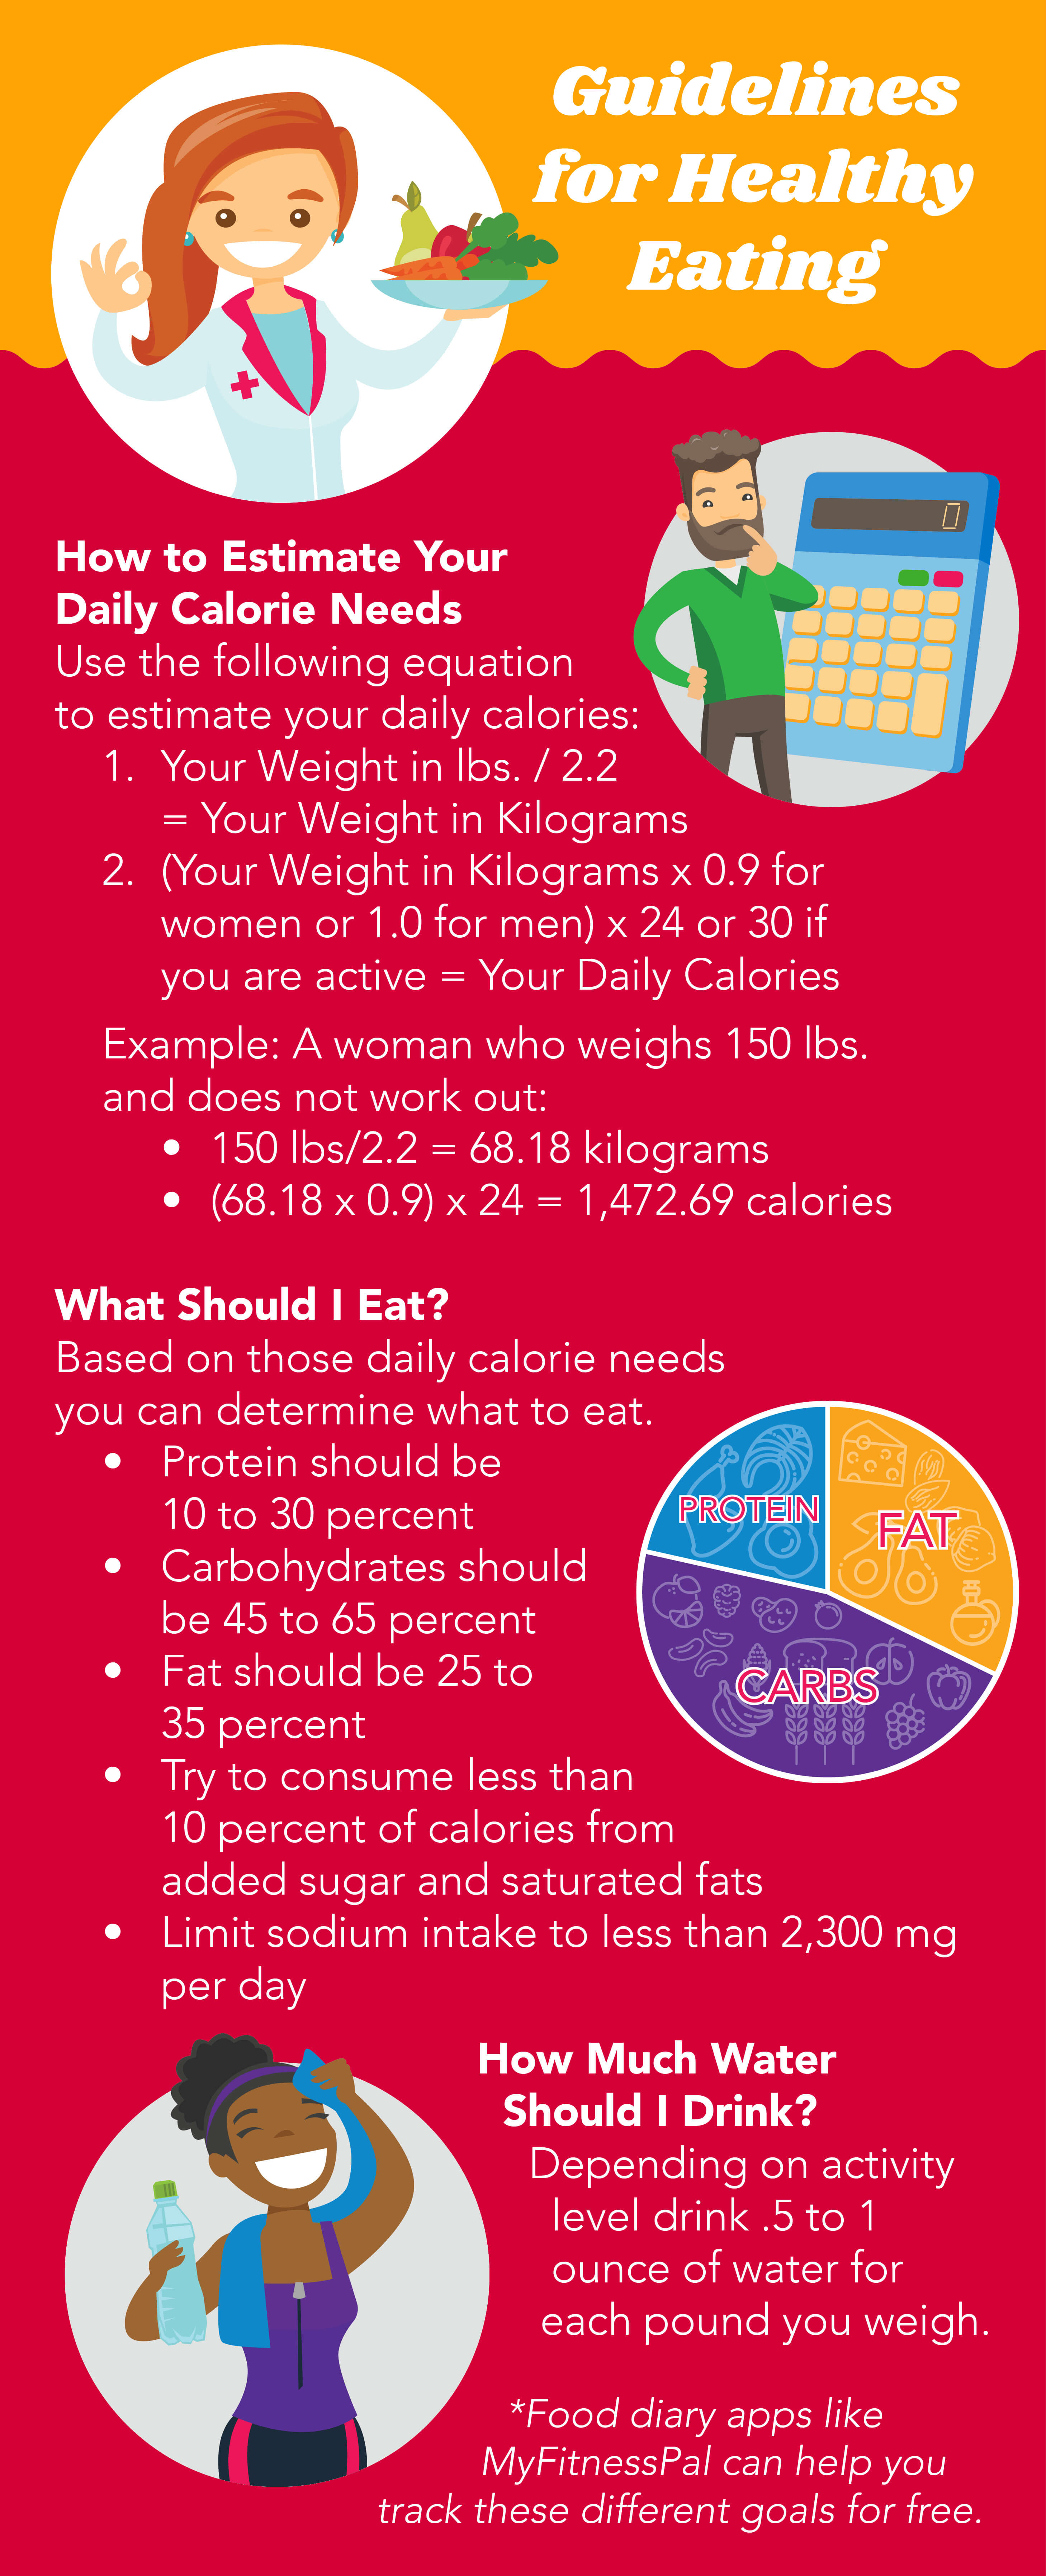 Guidelines for Healthy Eating infographic preview